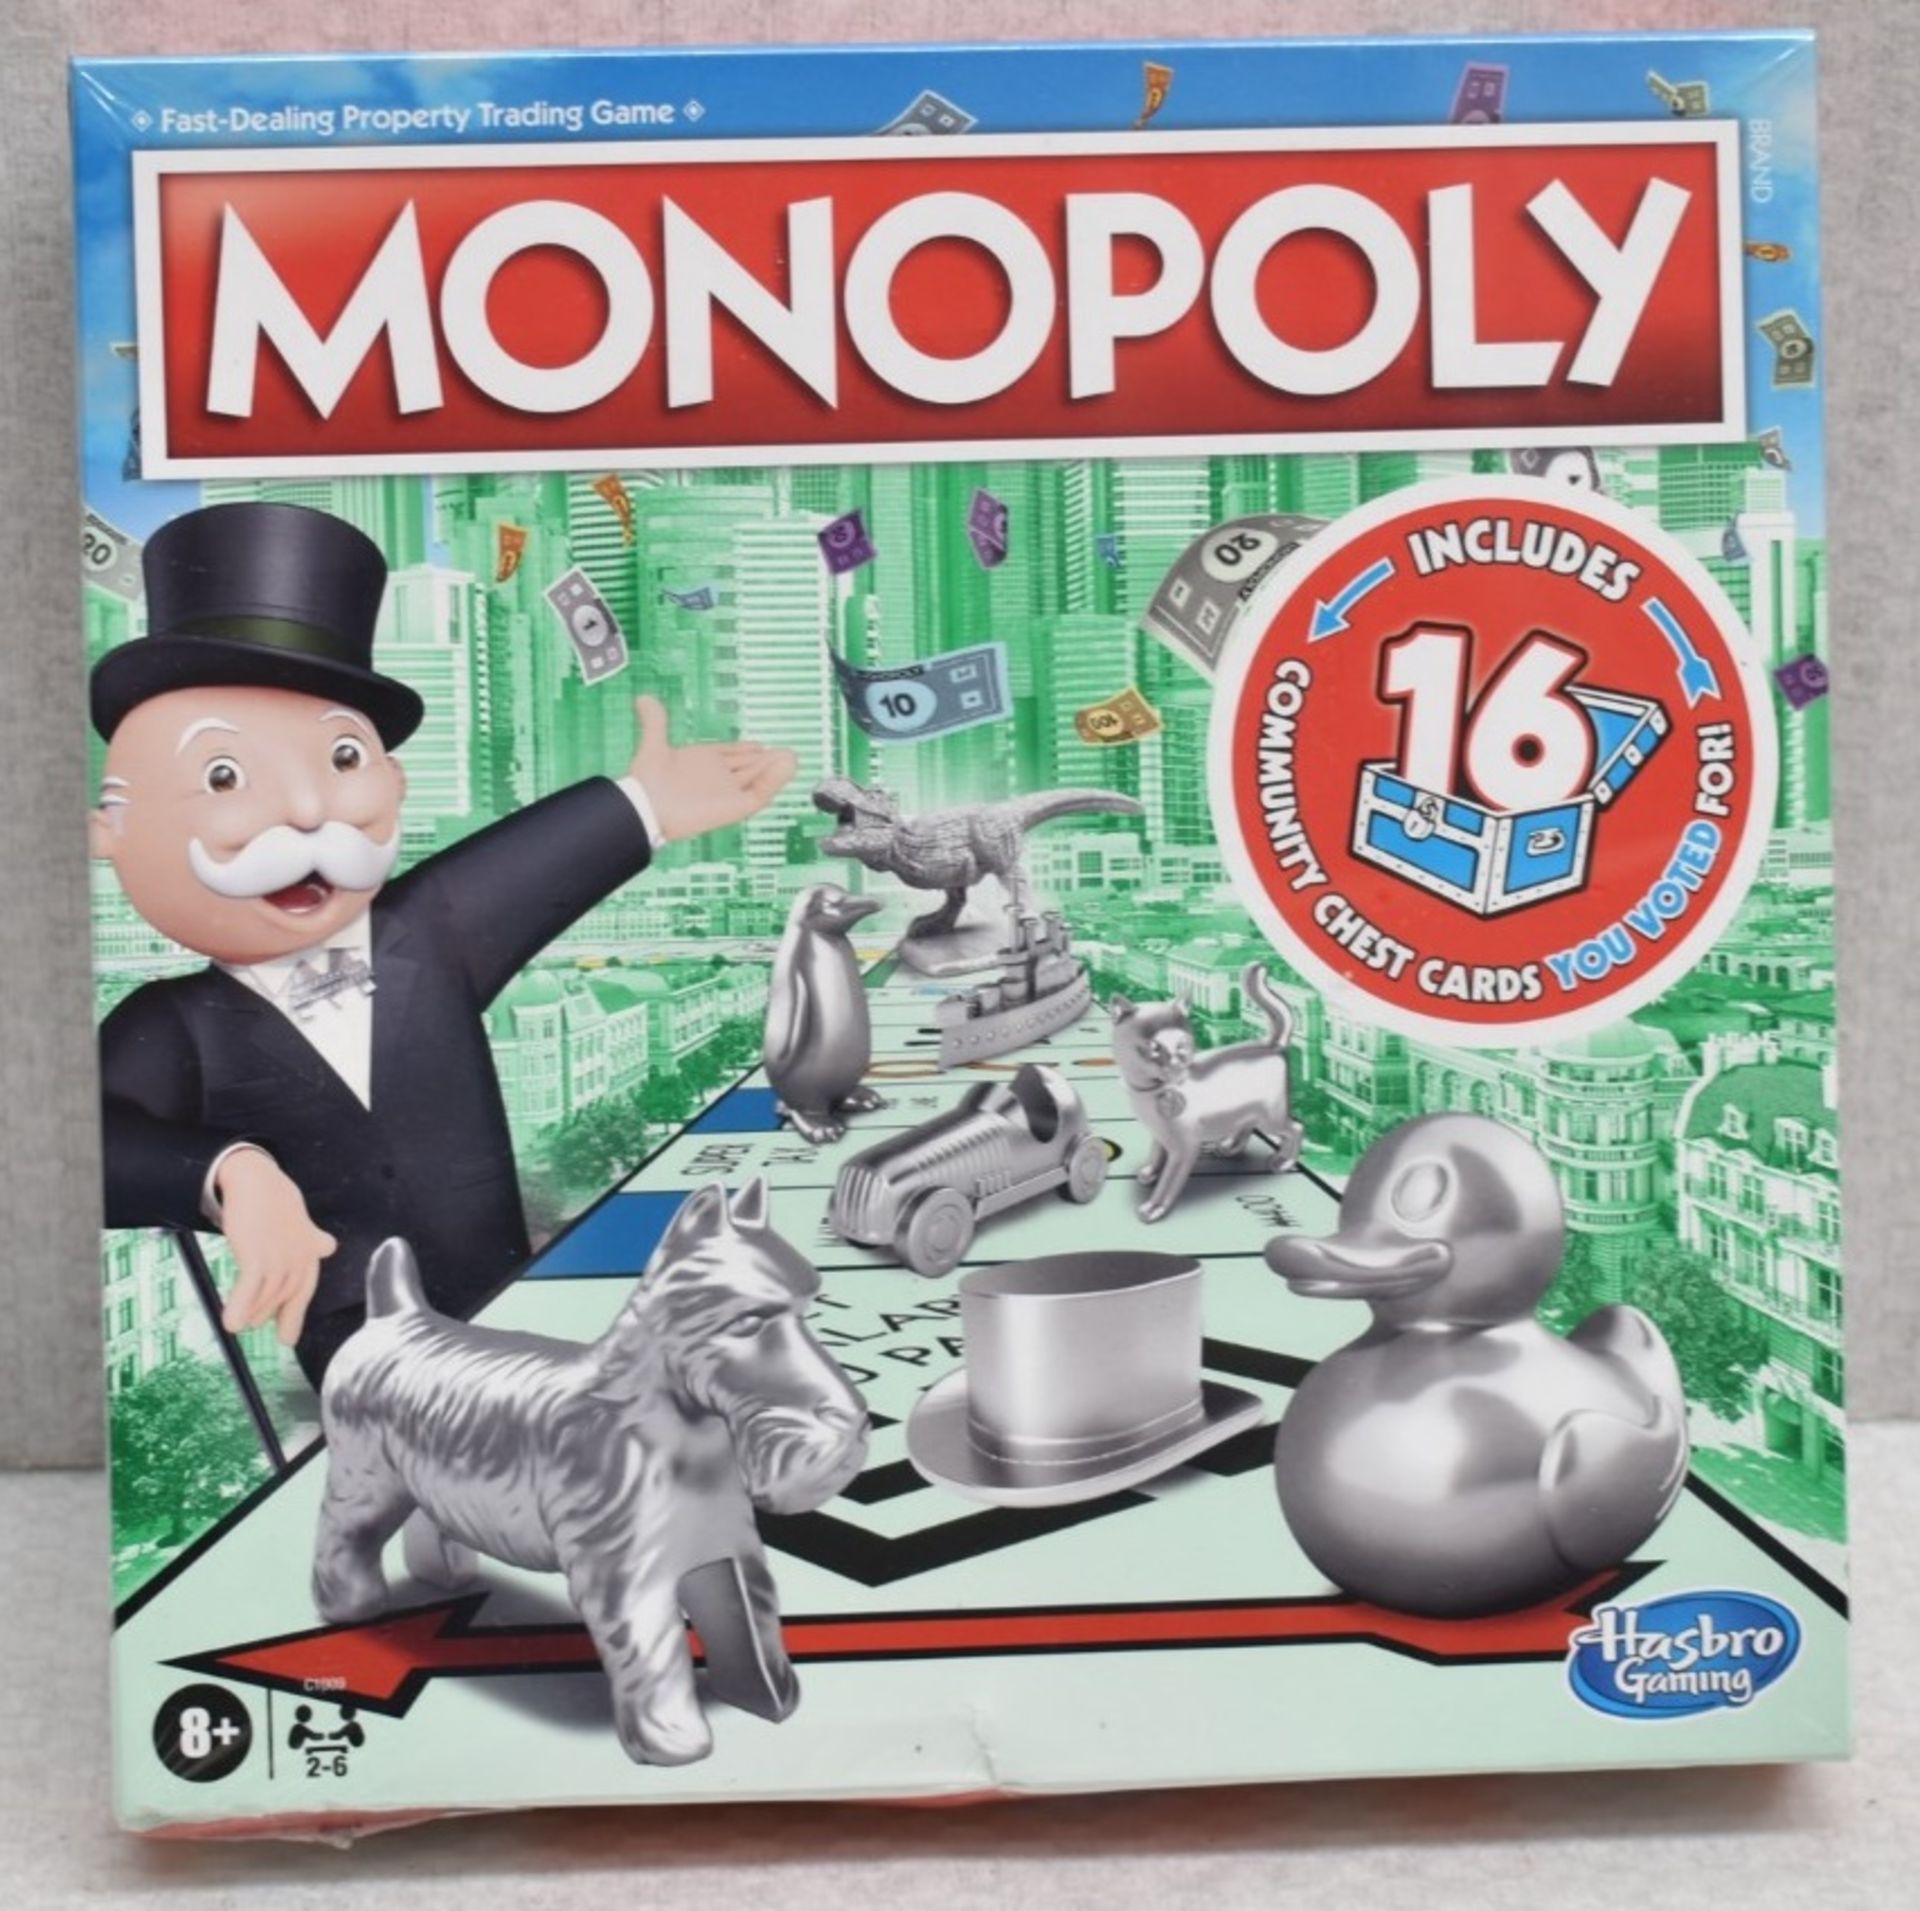 1 x MONOPOLY BOARD GAME - Unused Boxed Stock - Ref: HAS2339/WH2/C11/02-23-1 - CL987 - Location: